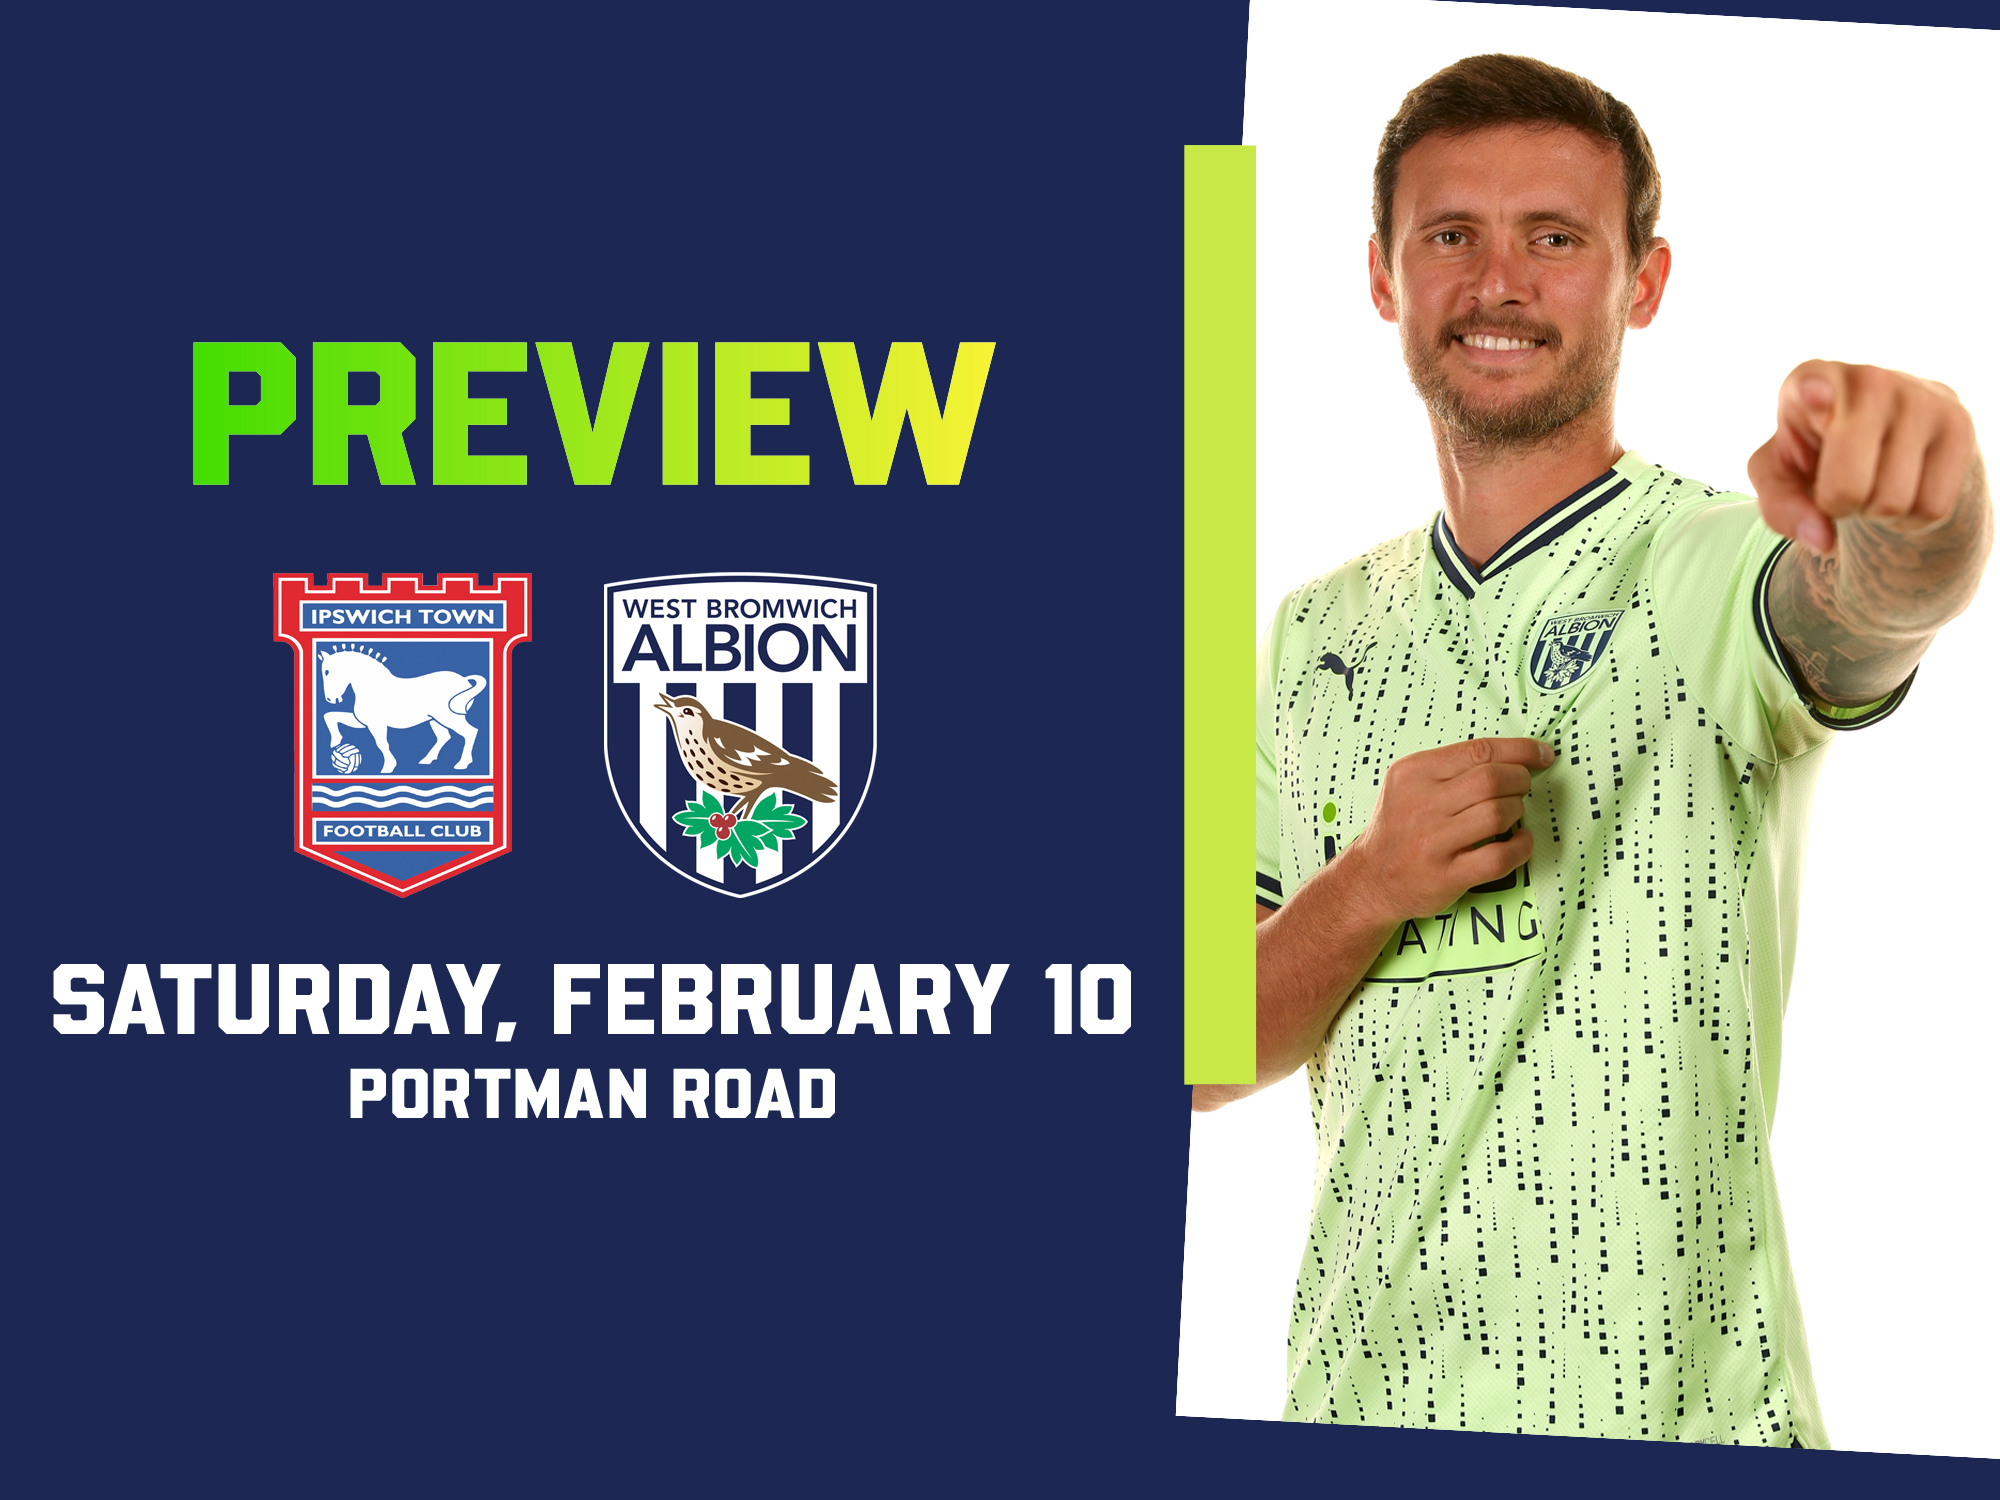 Ipswich Town and West Bromwich Albion badges with an image of John Swift smiling and pointing at the camera wearing the green kit on the green away kit graphic 